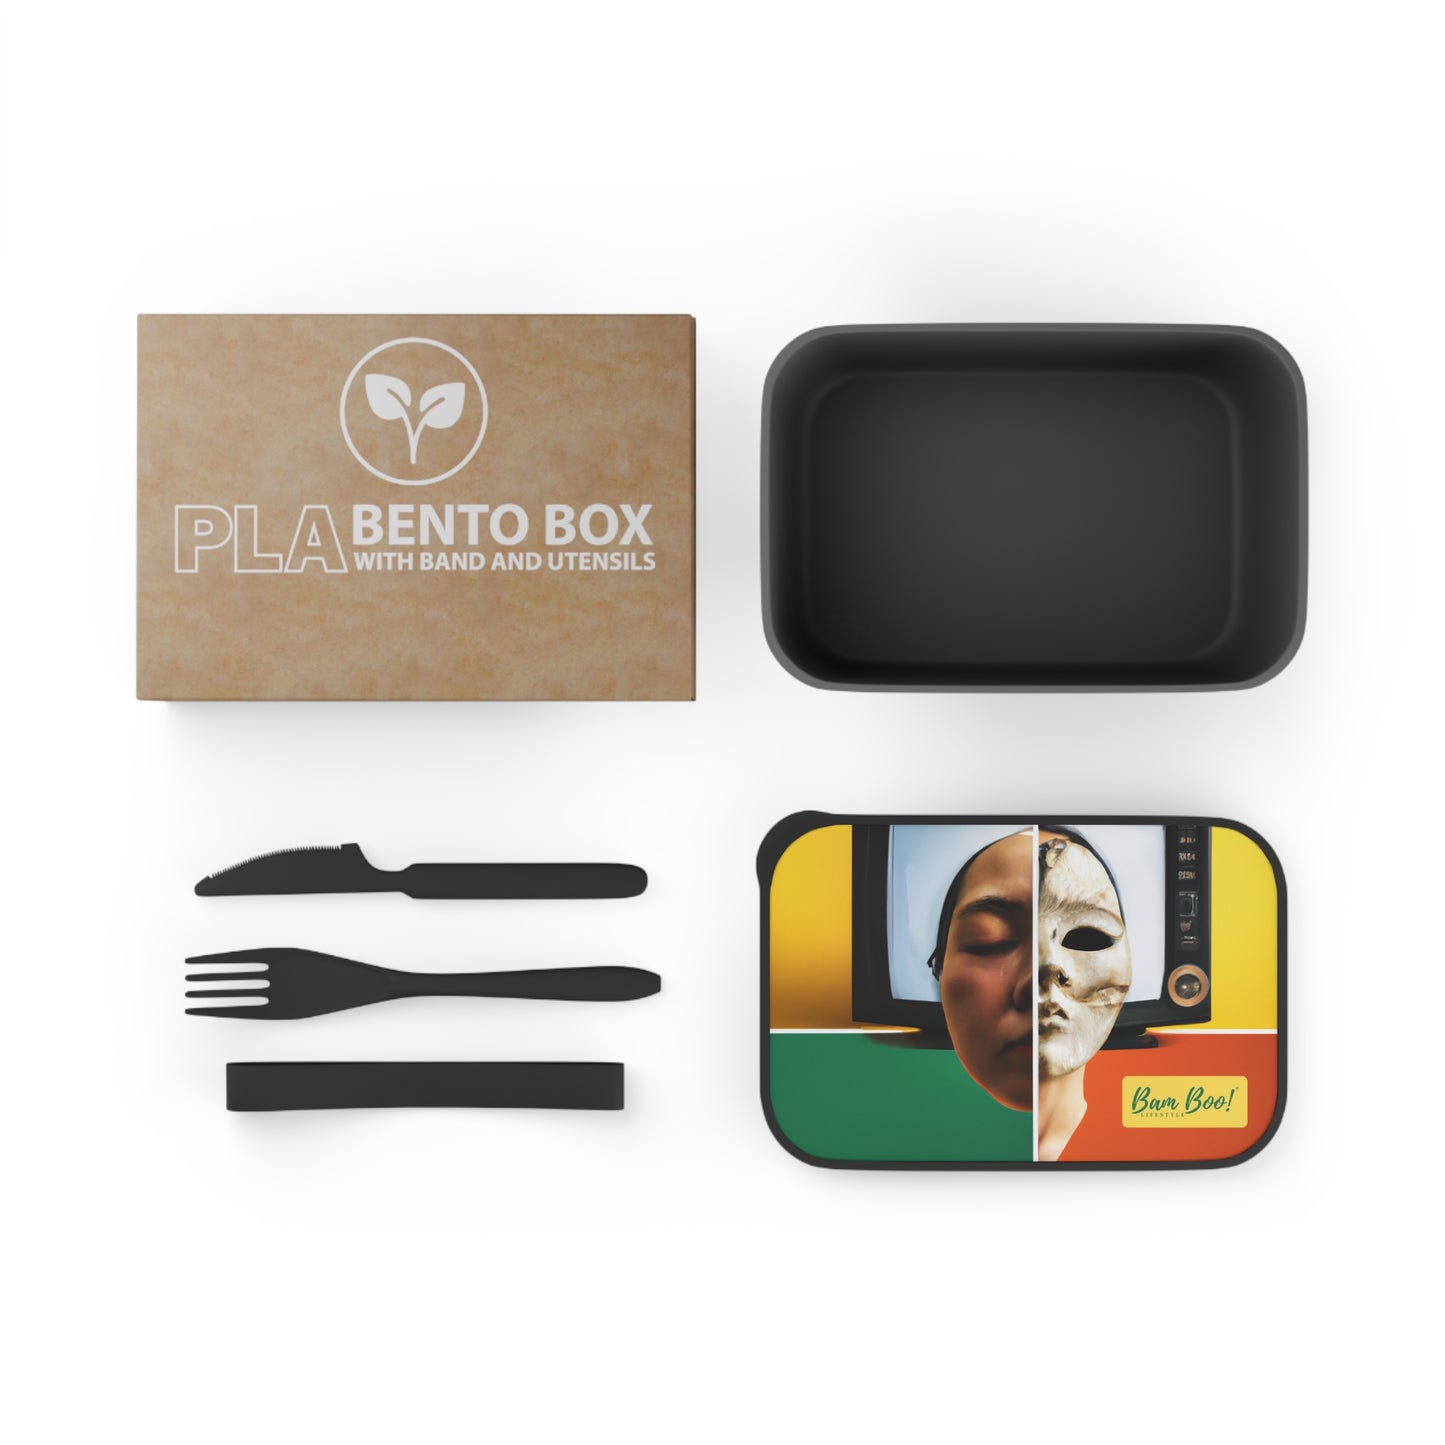 My Personal Vision Collage: A Creative Self-Portrait. - Bam Boo! Lifestyle Eco-friendly PLA Bento Box with Band and Utensils